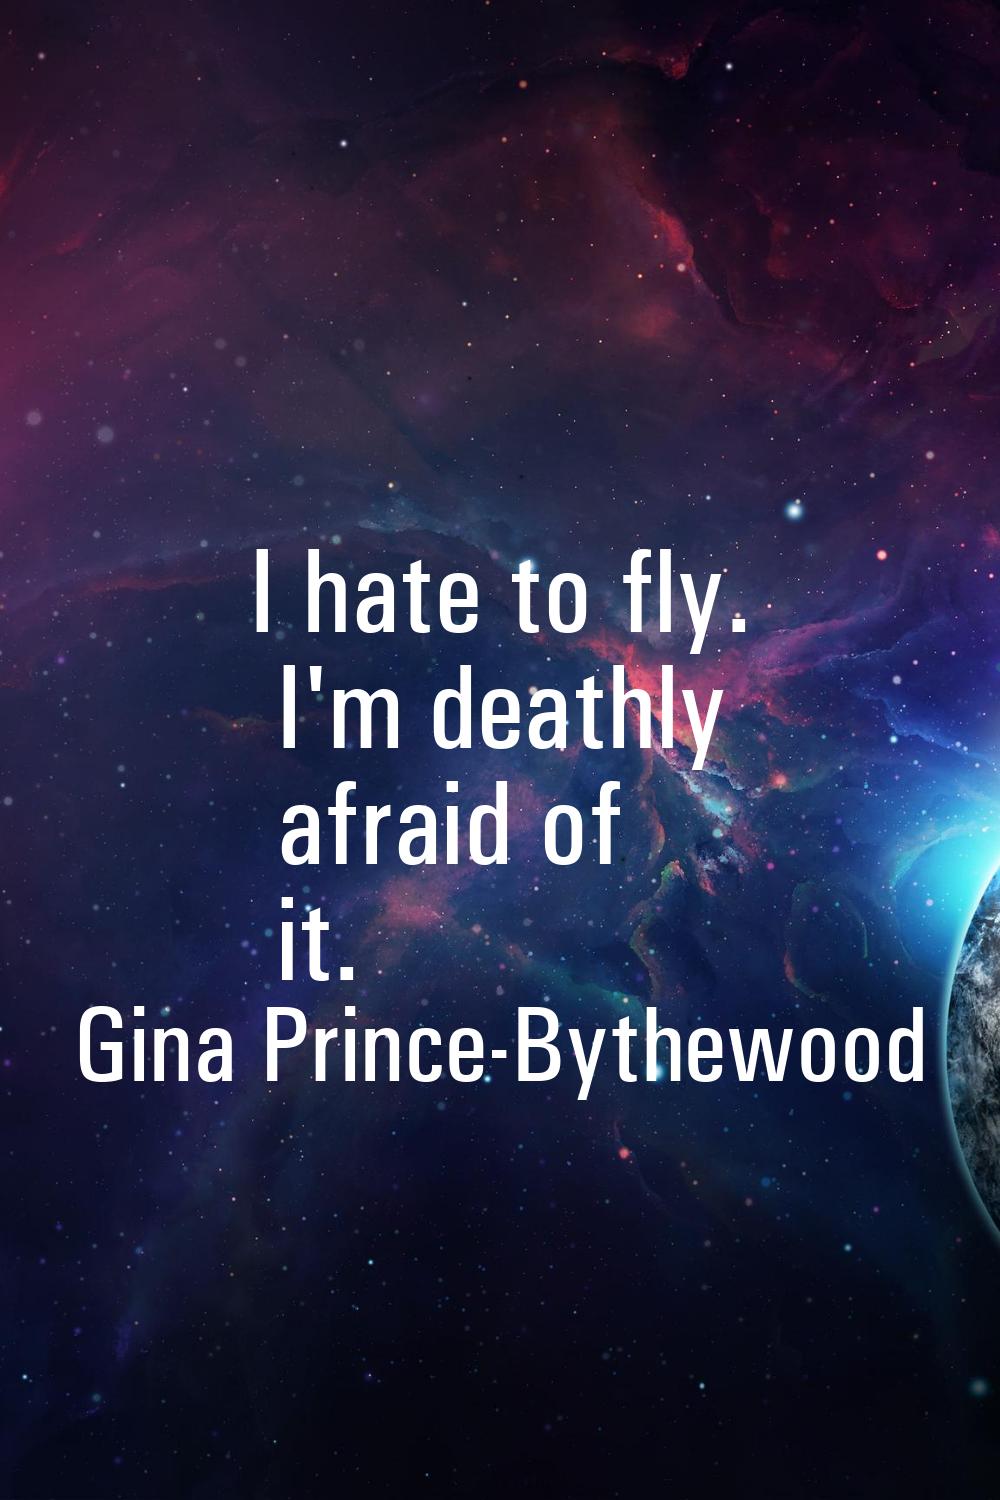 I hate to fly. I'm deathly afraid of it.